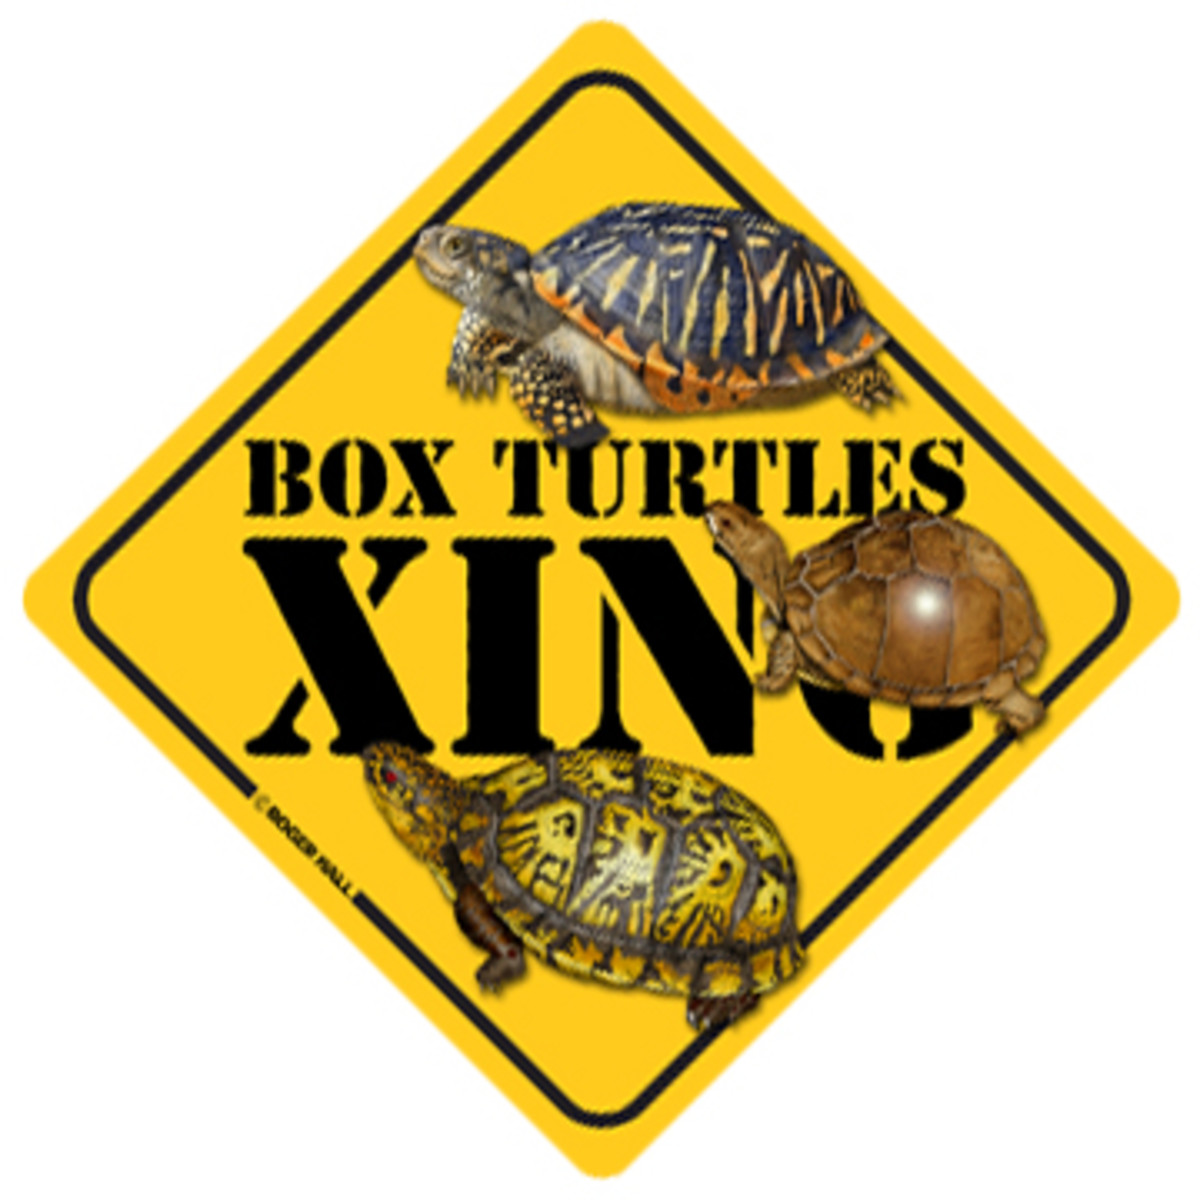 dad-why-do-the-little-box-turtles-try-to-cross-the-road-can-we-help-them